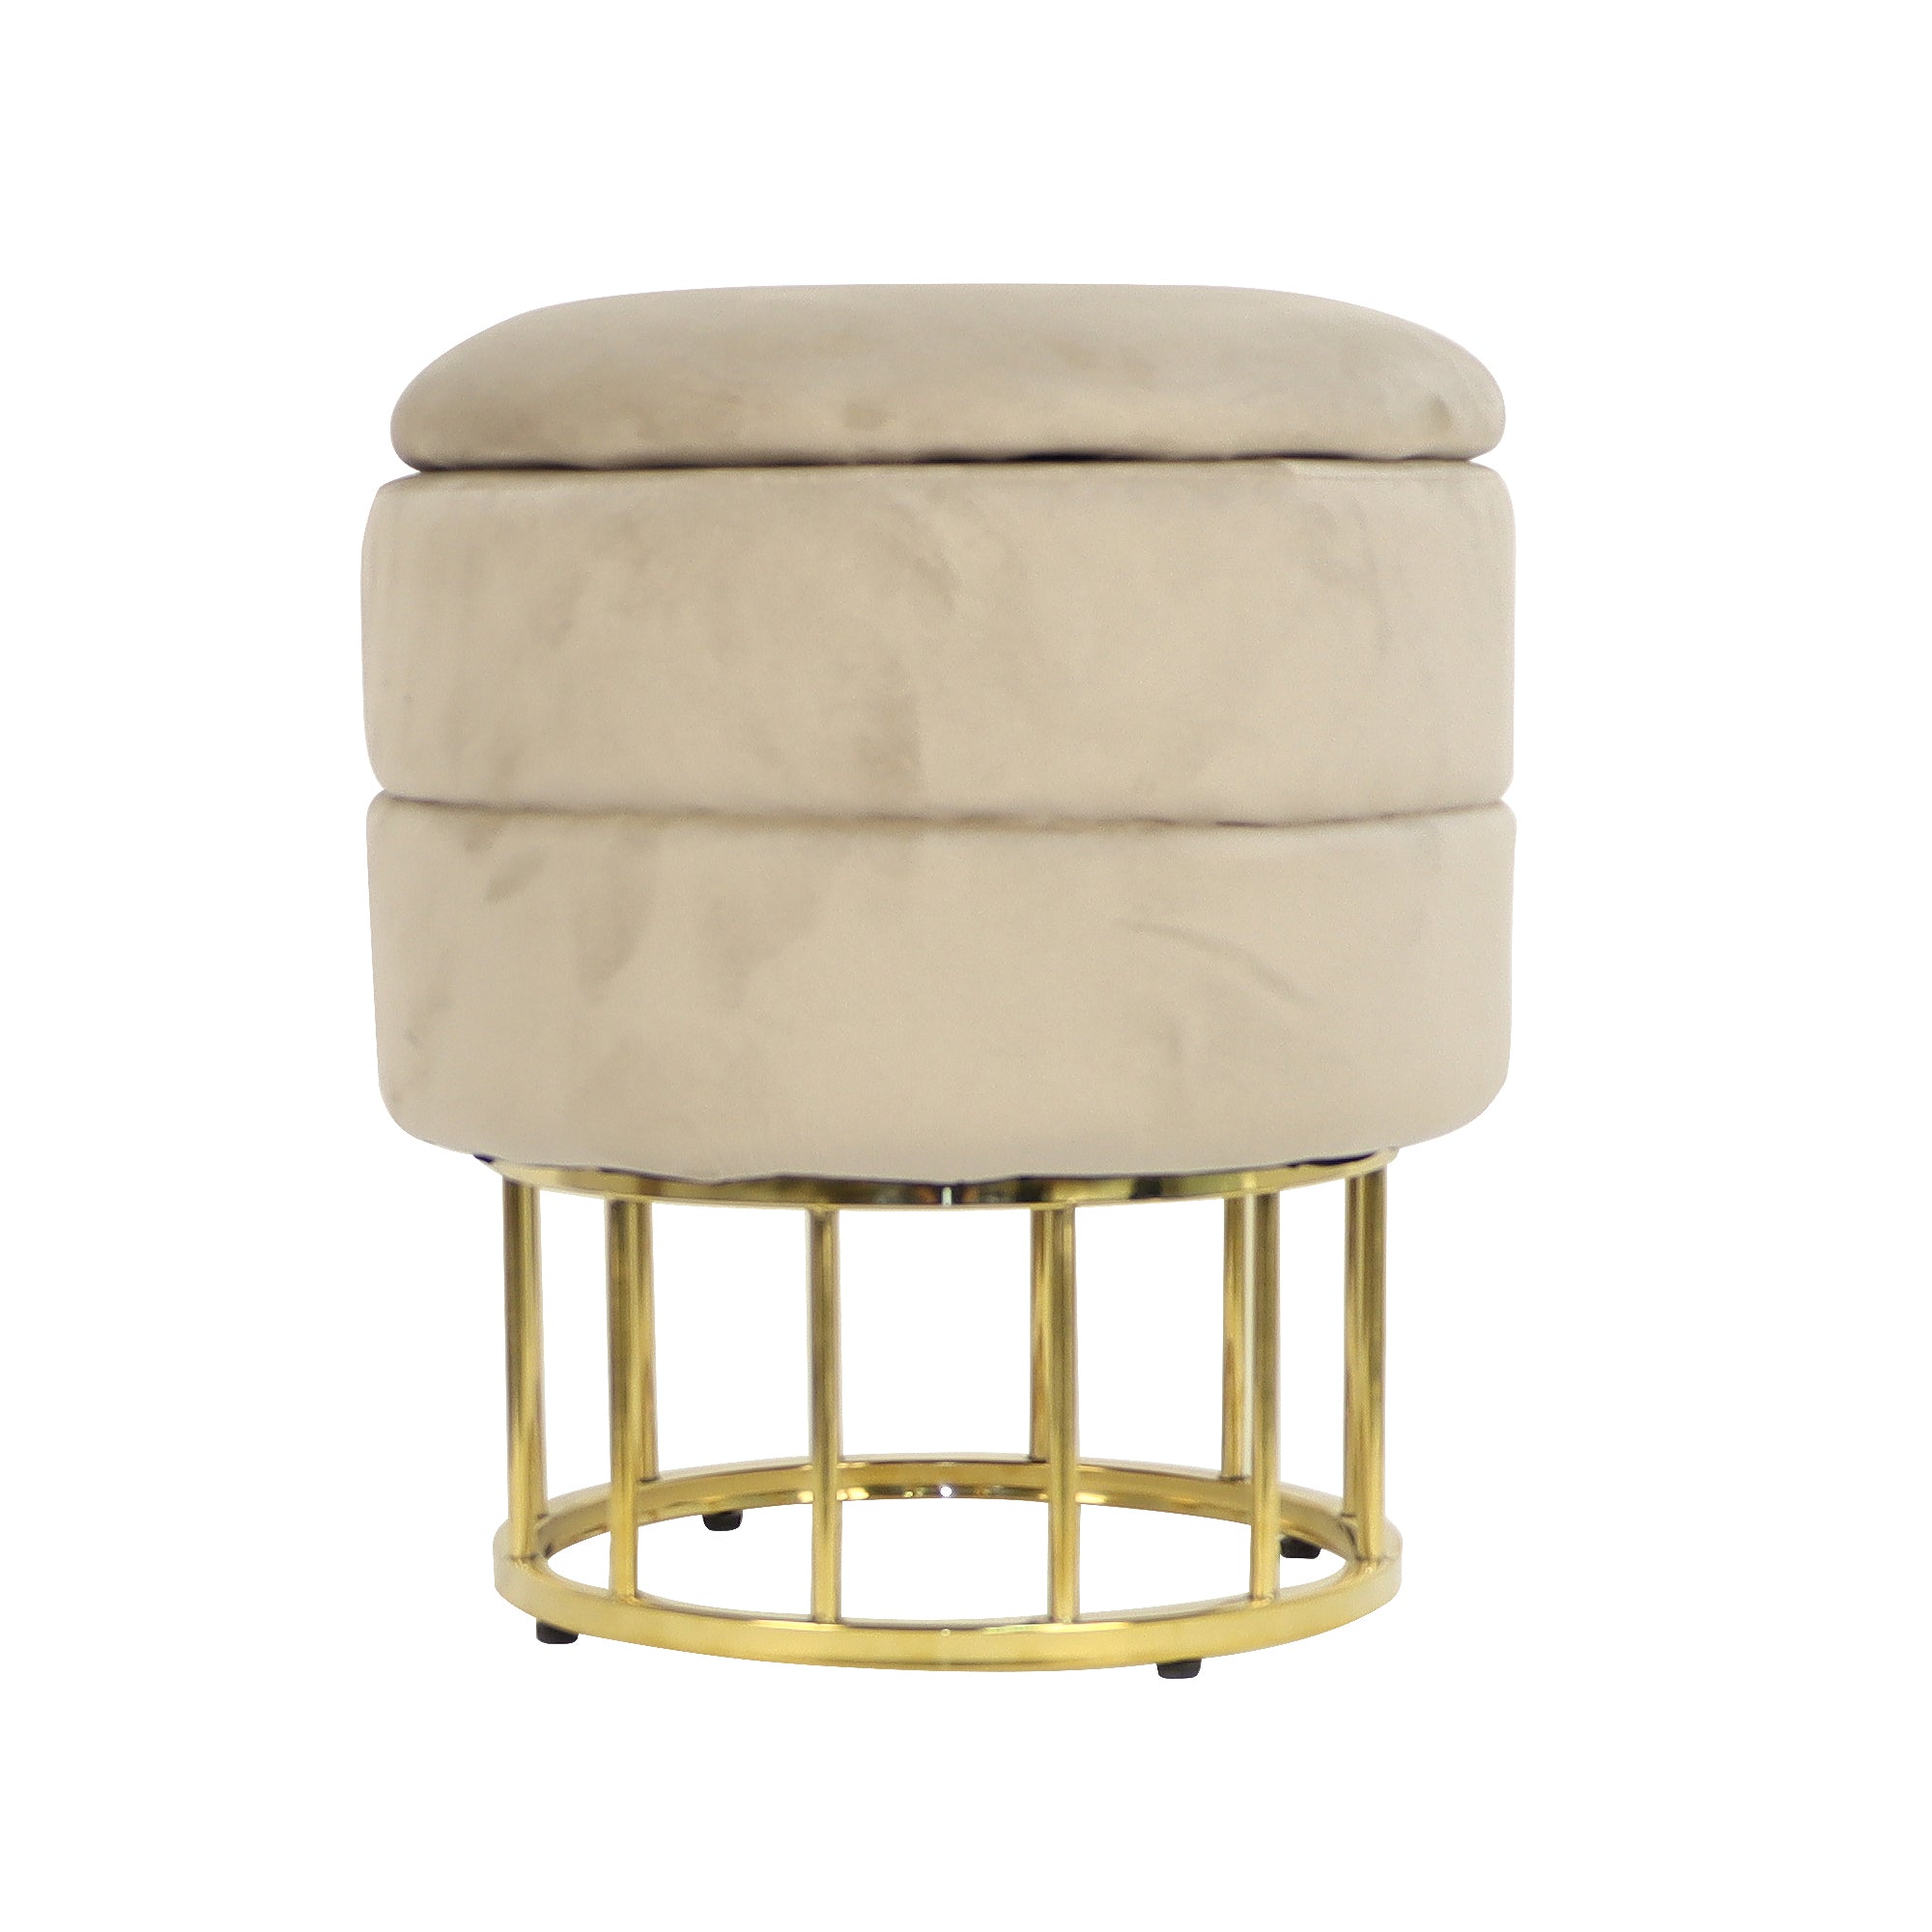 ZNTS Button Tufted Round Storage Ottoman for Living Room & Bedroom,Gold Stainless Steel Leg W172790853